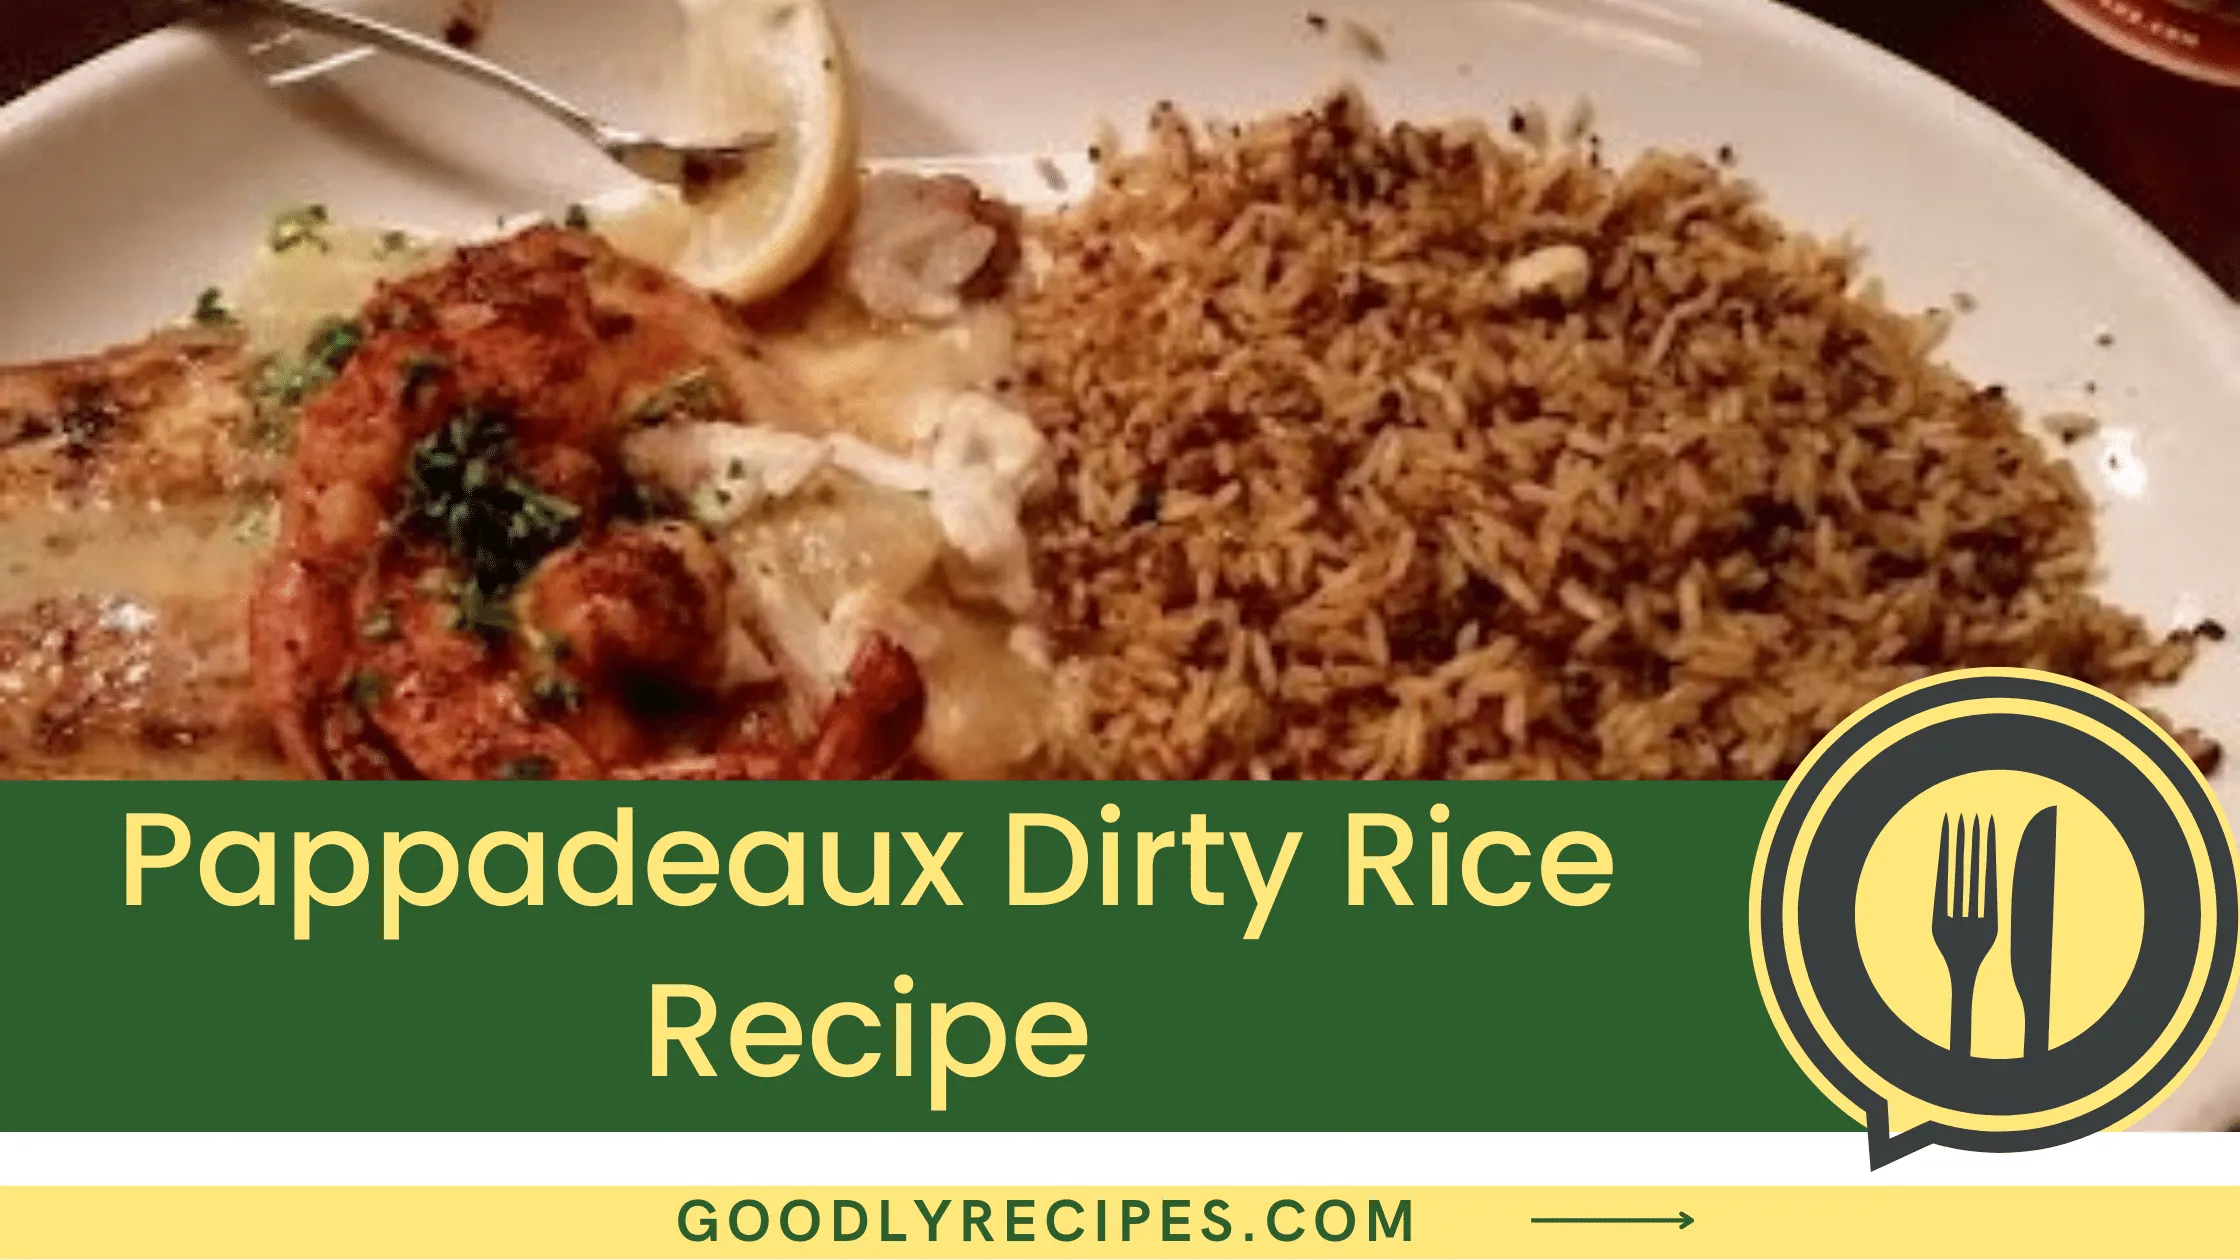 What Is Pappadeaux Dirty Rice?